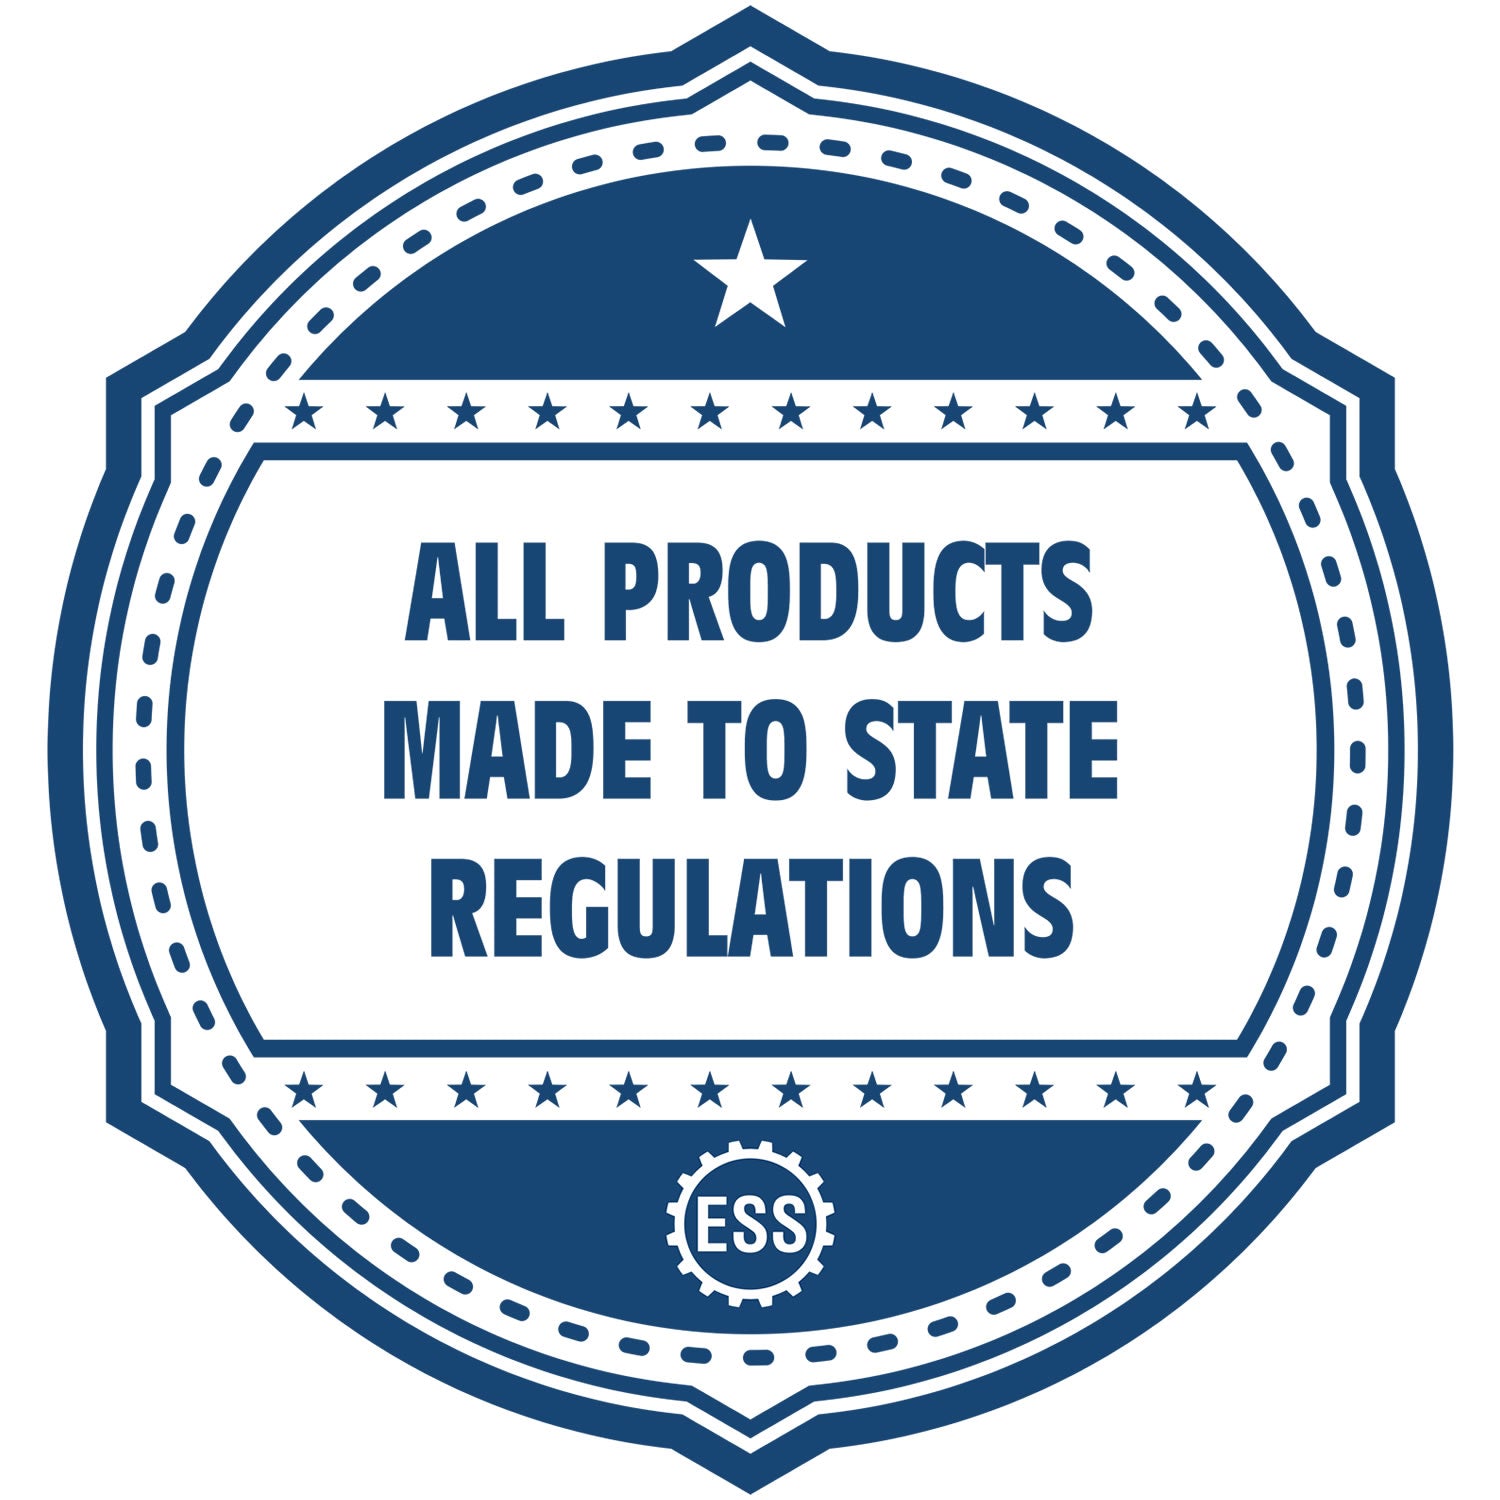 An icon or badge element for the New Mexico Desk Surveyor Seal Embosser showing that this product is made in compliance with state regulations.